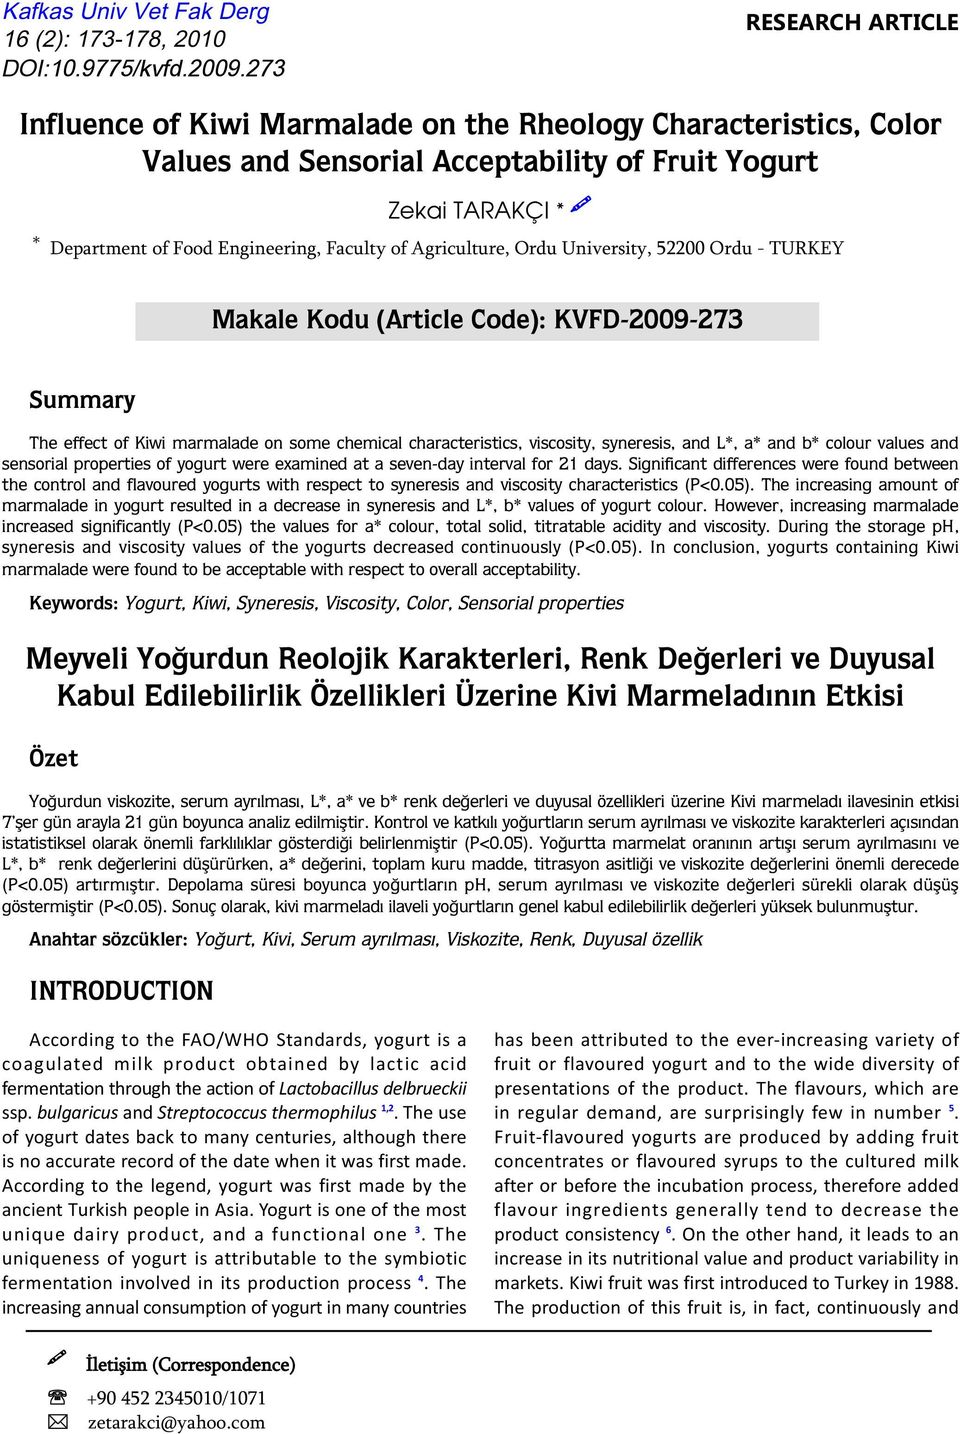 Agriculture, Ordu University, 52200 Ordu - TURKEY Makale Kodu (Article Code): KVFD-2009-273 Summary The effect of Kiwi marmalade on some chemical characteristics, viscosity, syneresis, and L*, a* and